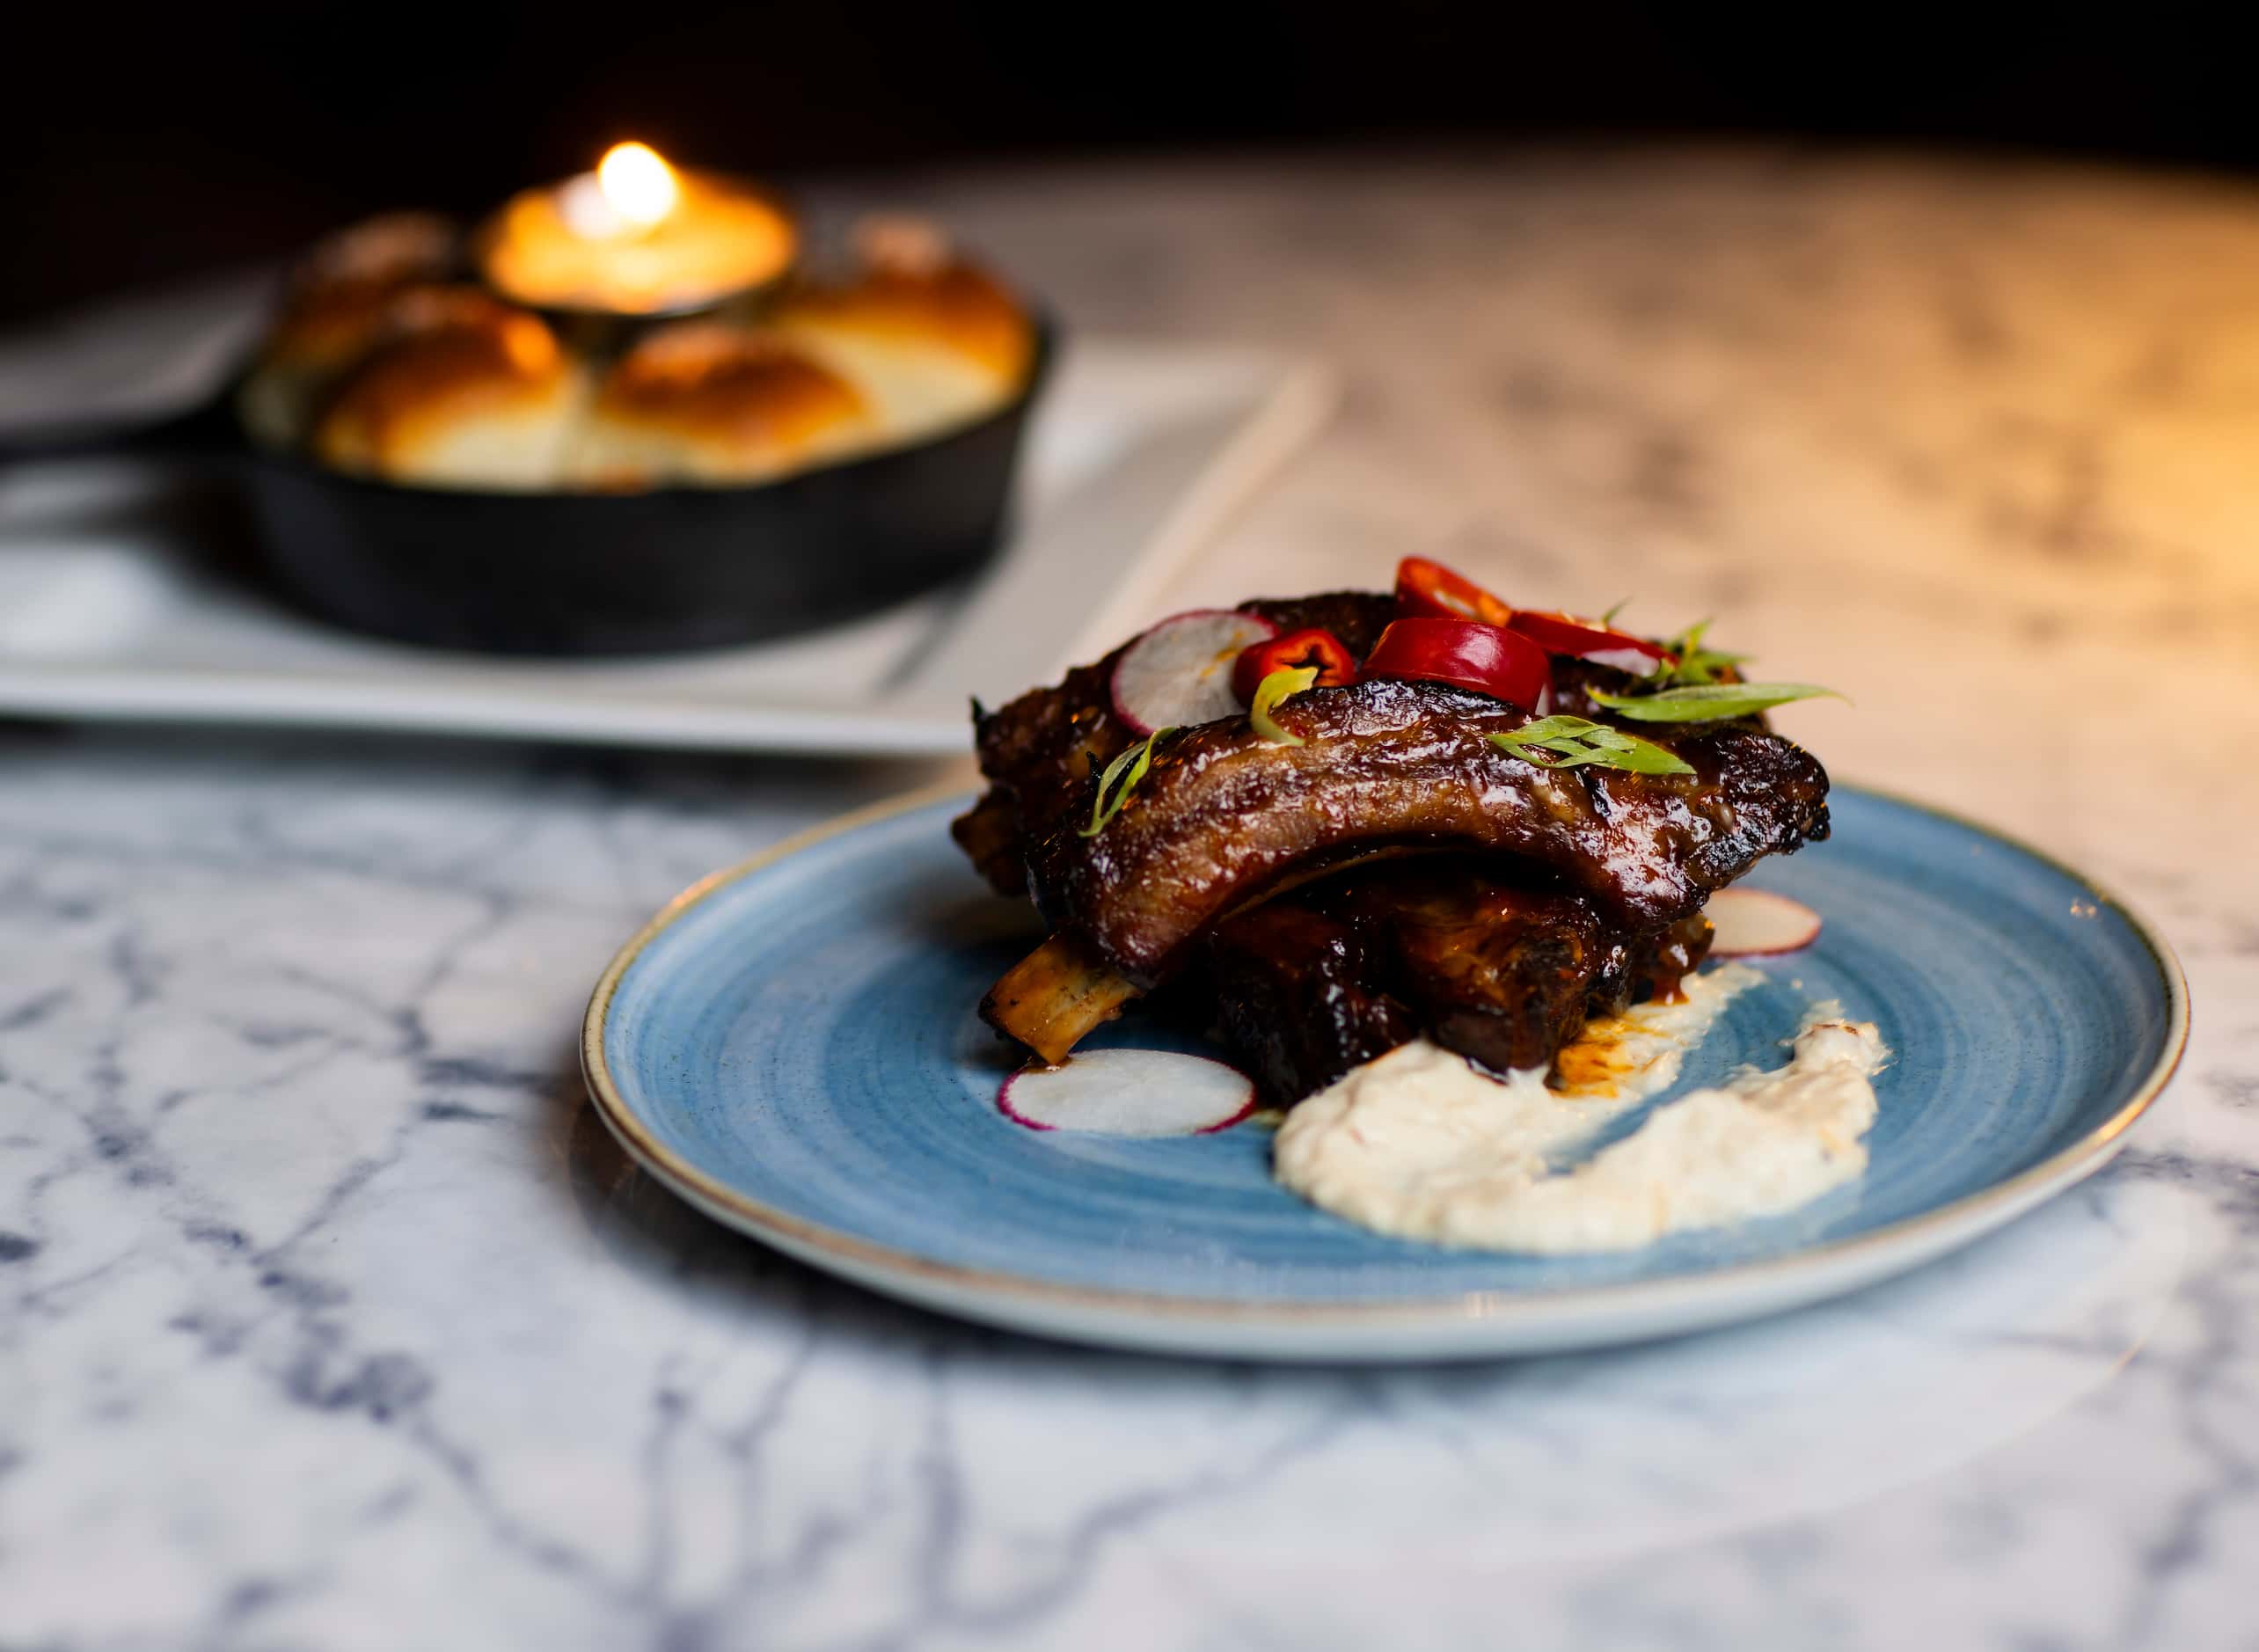 The Wildred's Asian Sticky Ribs come with fresnos, radish, chives and garlic aioli.